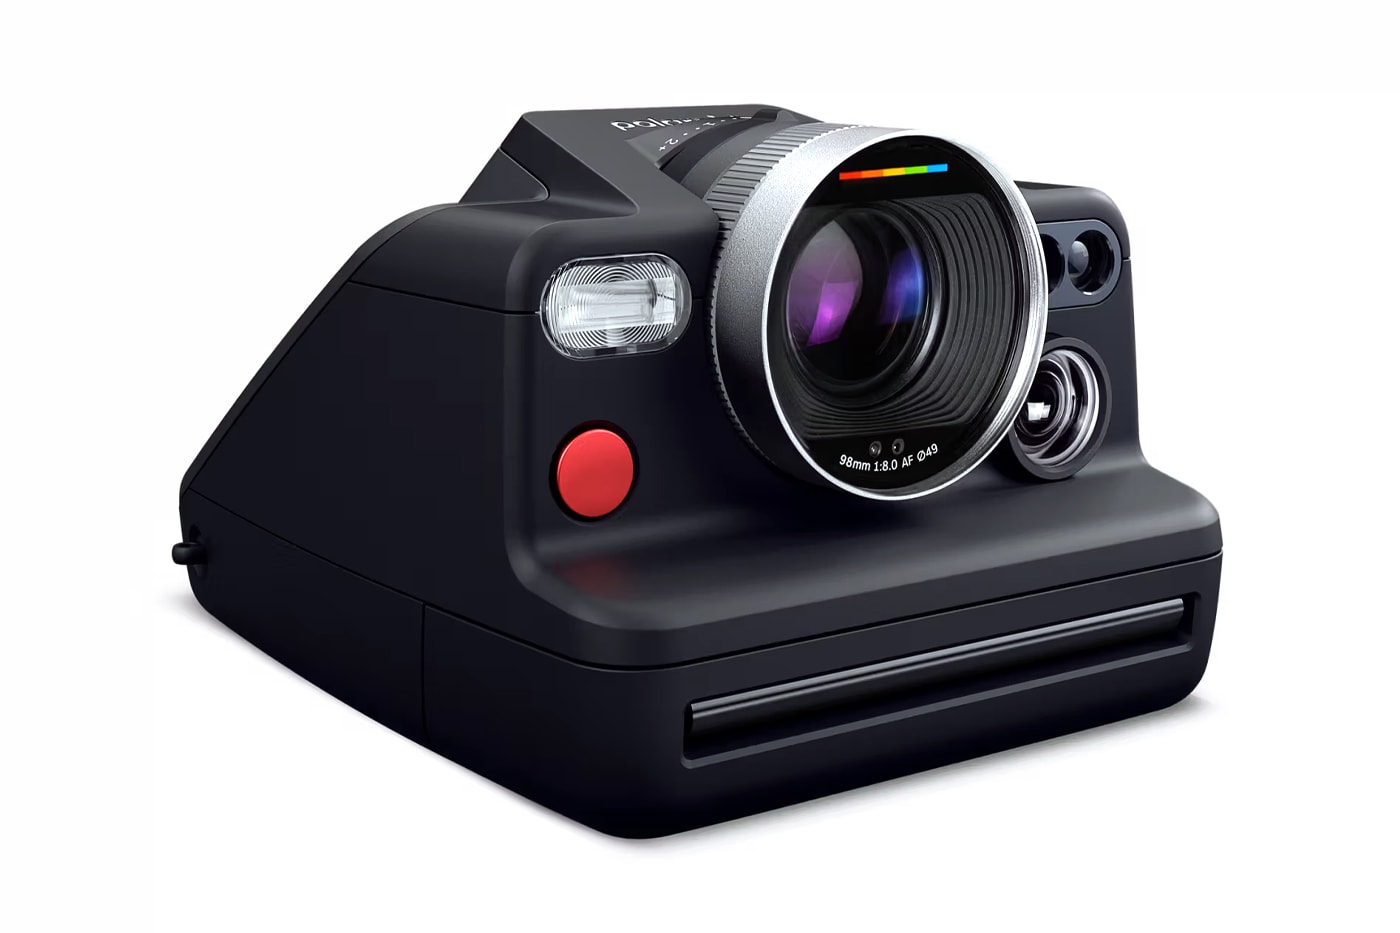 Polaroid is back! Unveils OneStep 2 instant camera and i-Type film